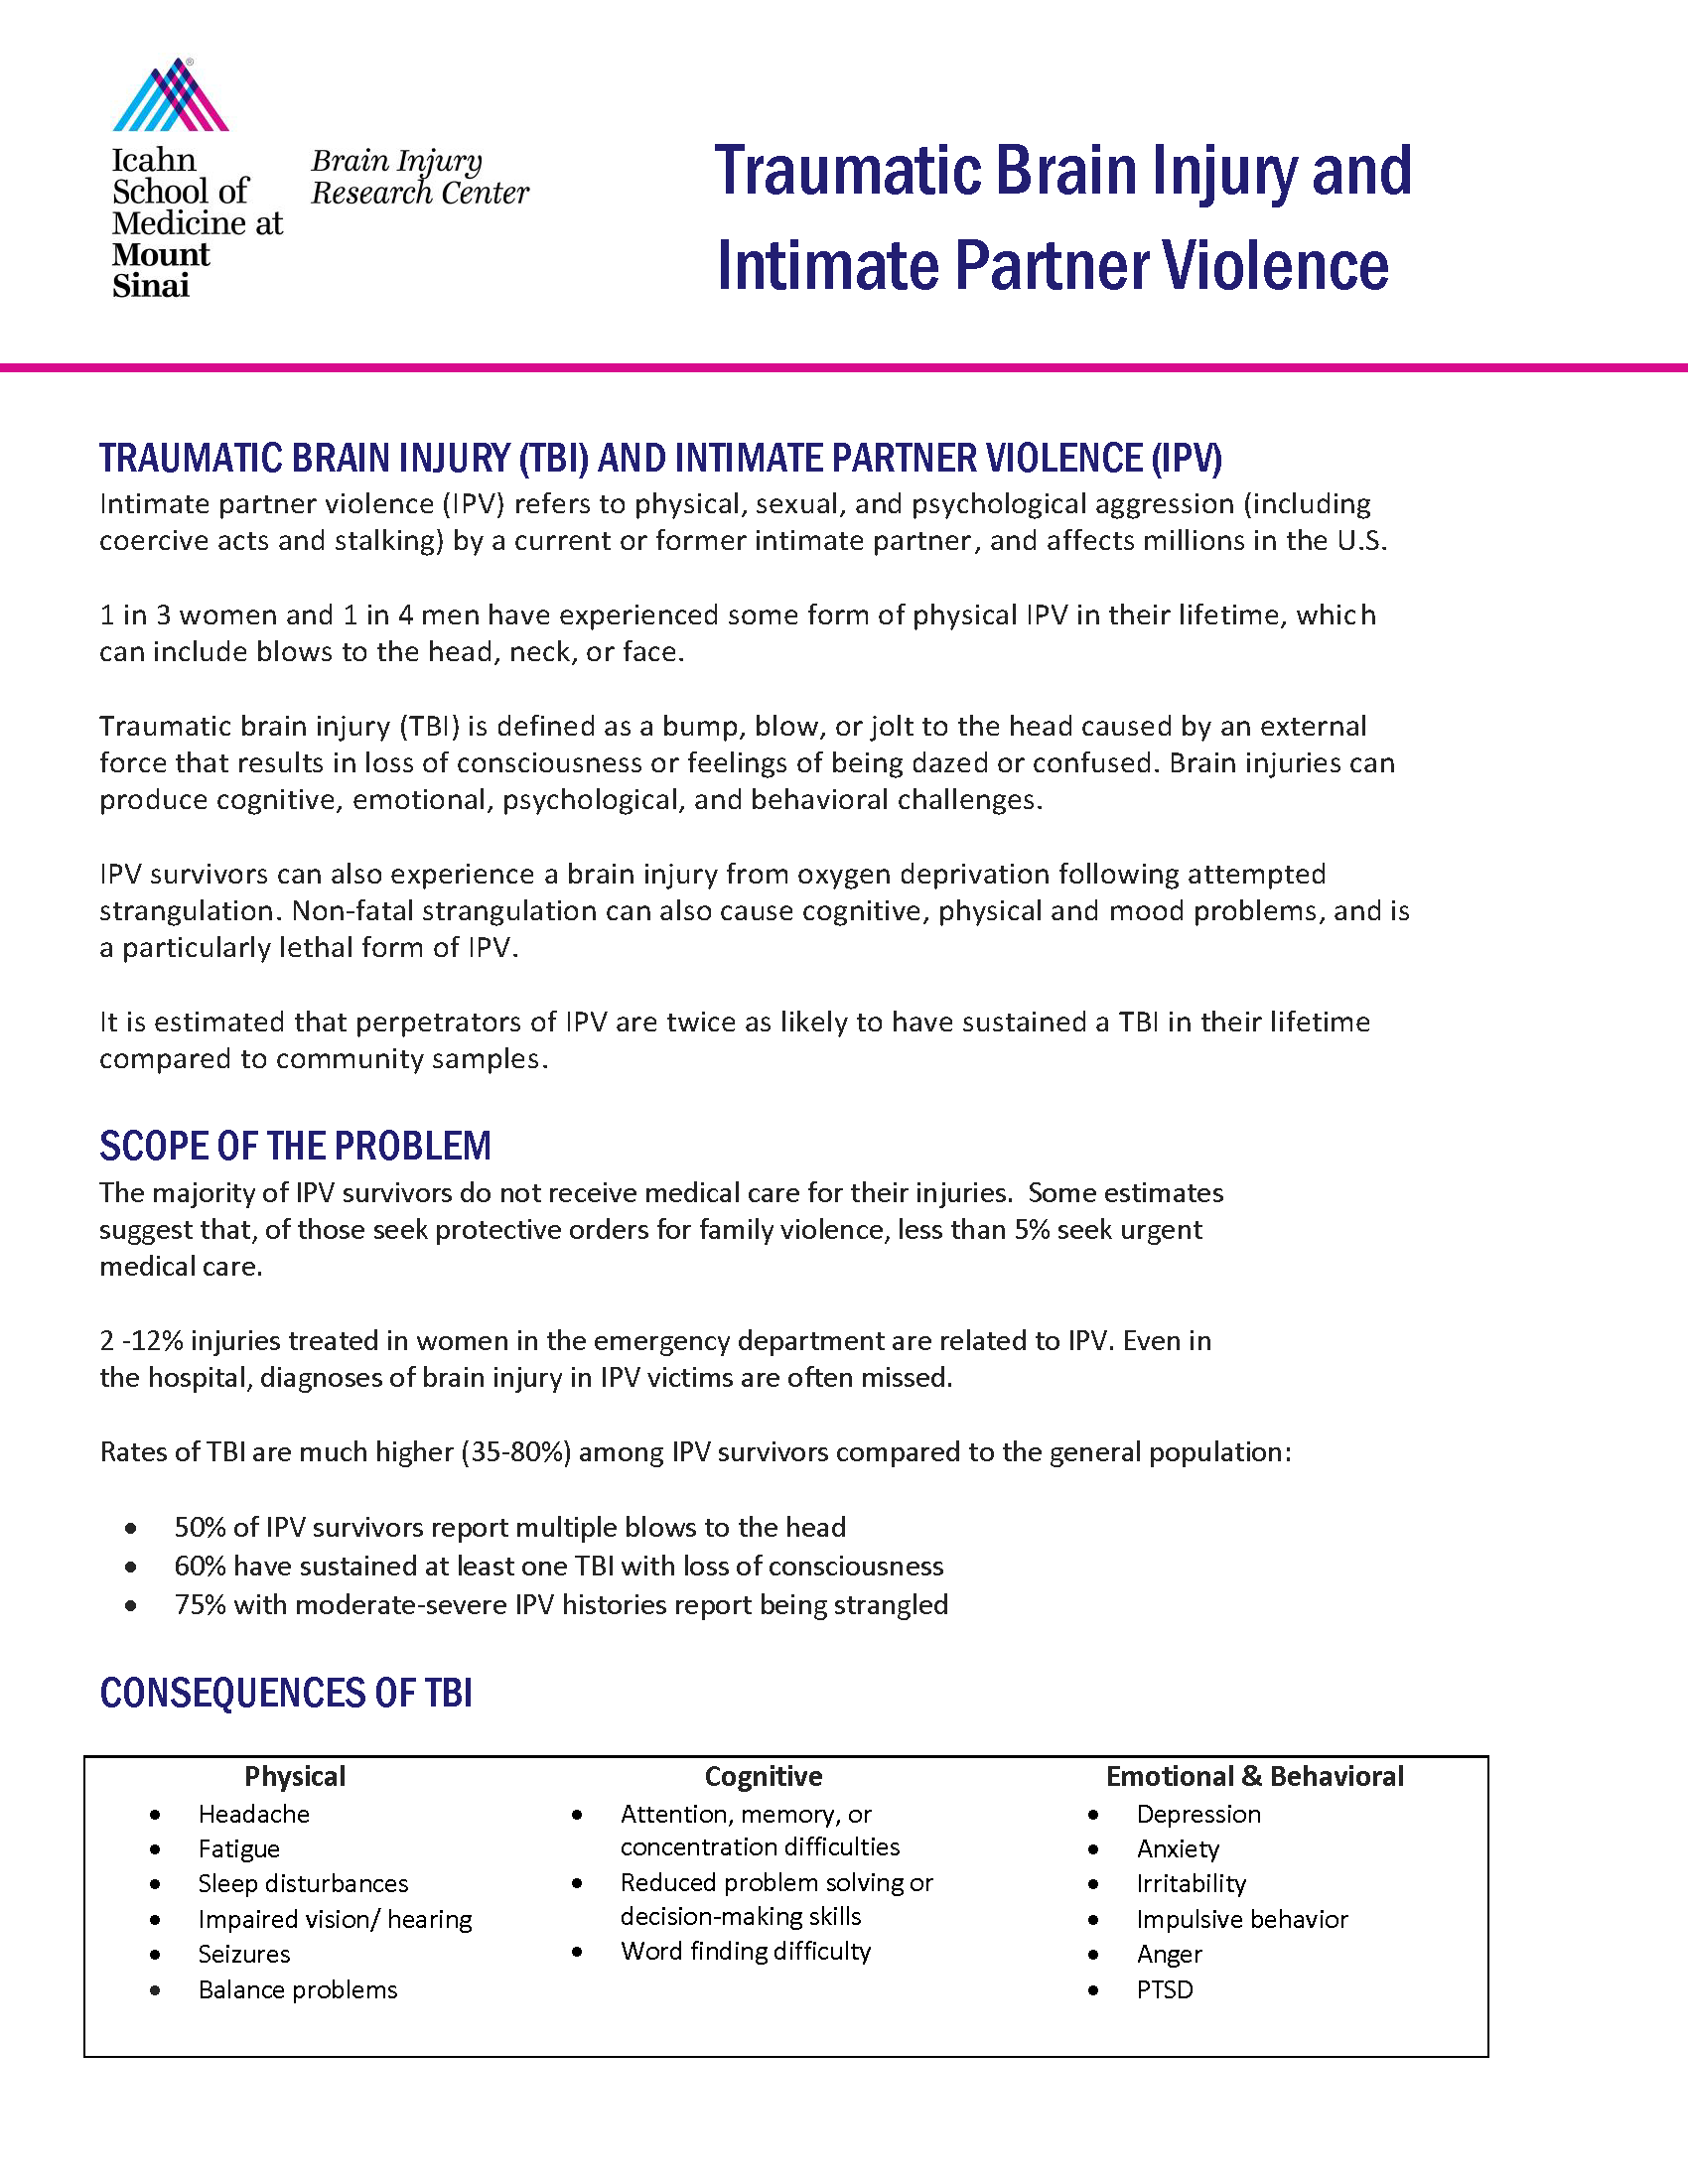 TBI and Intimate Partner Violence factsheet 1